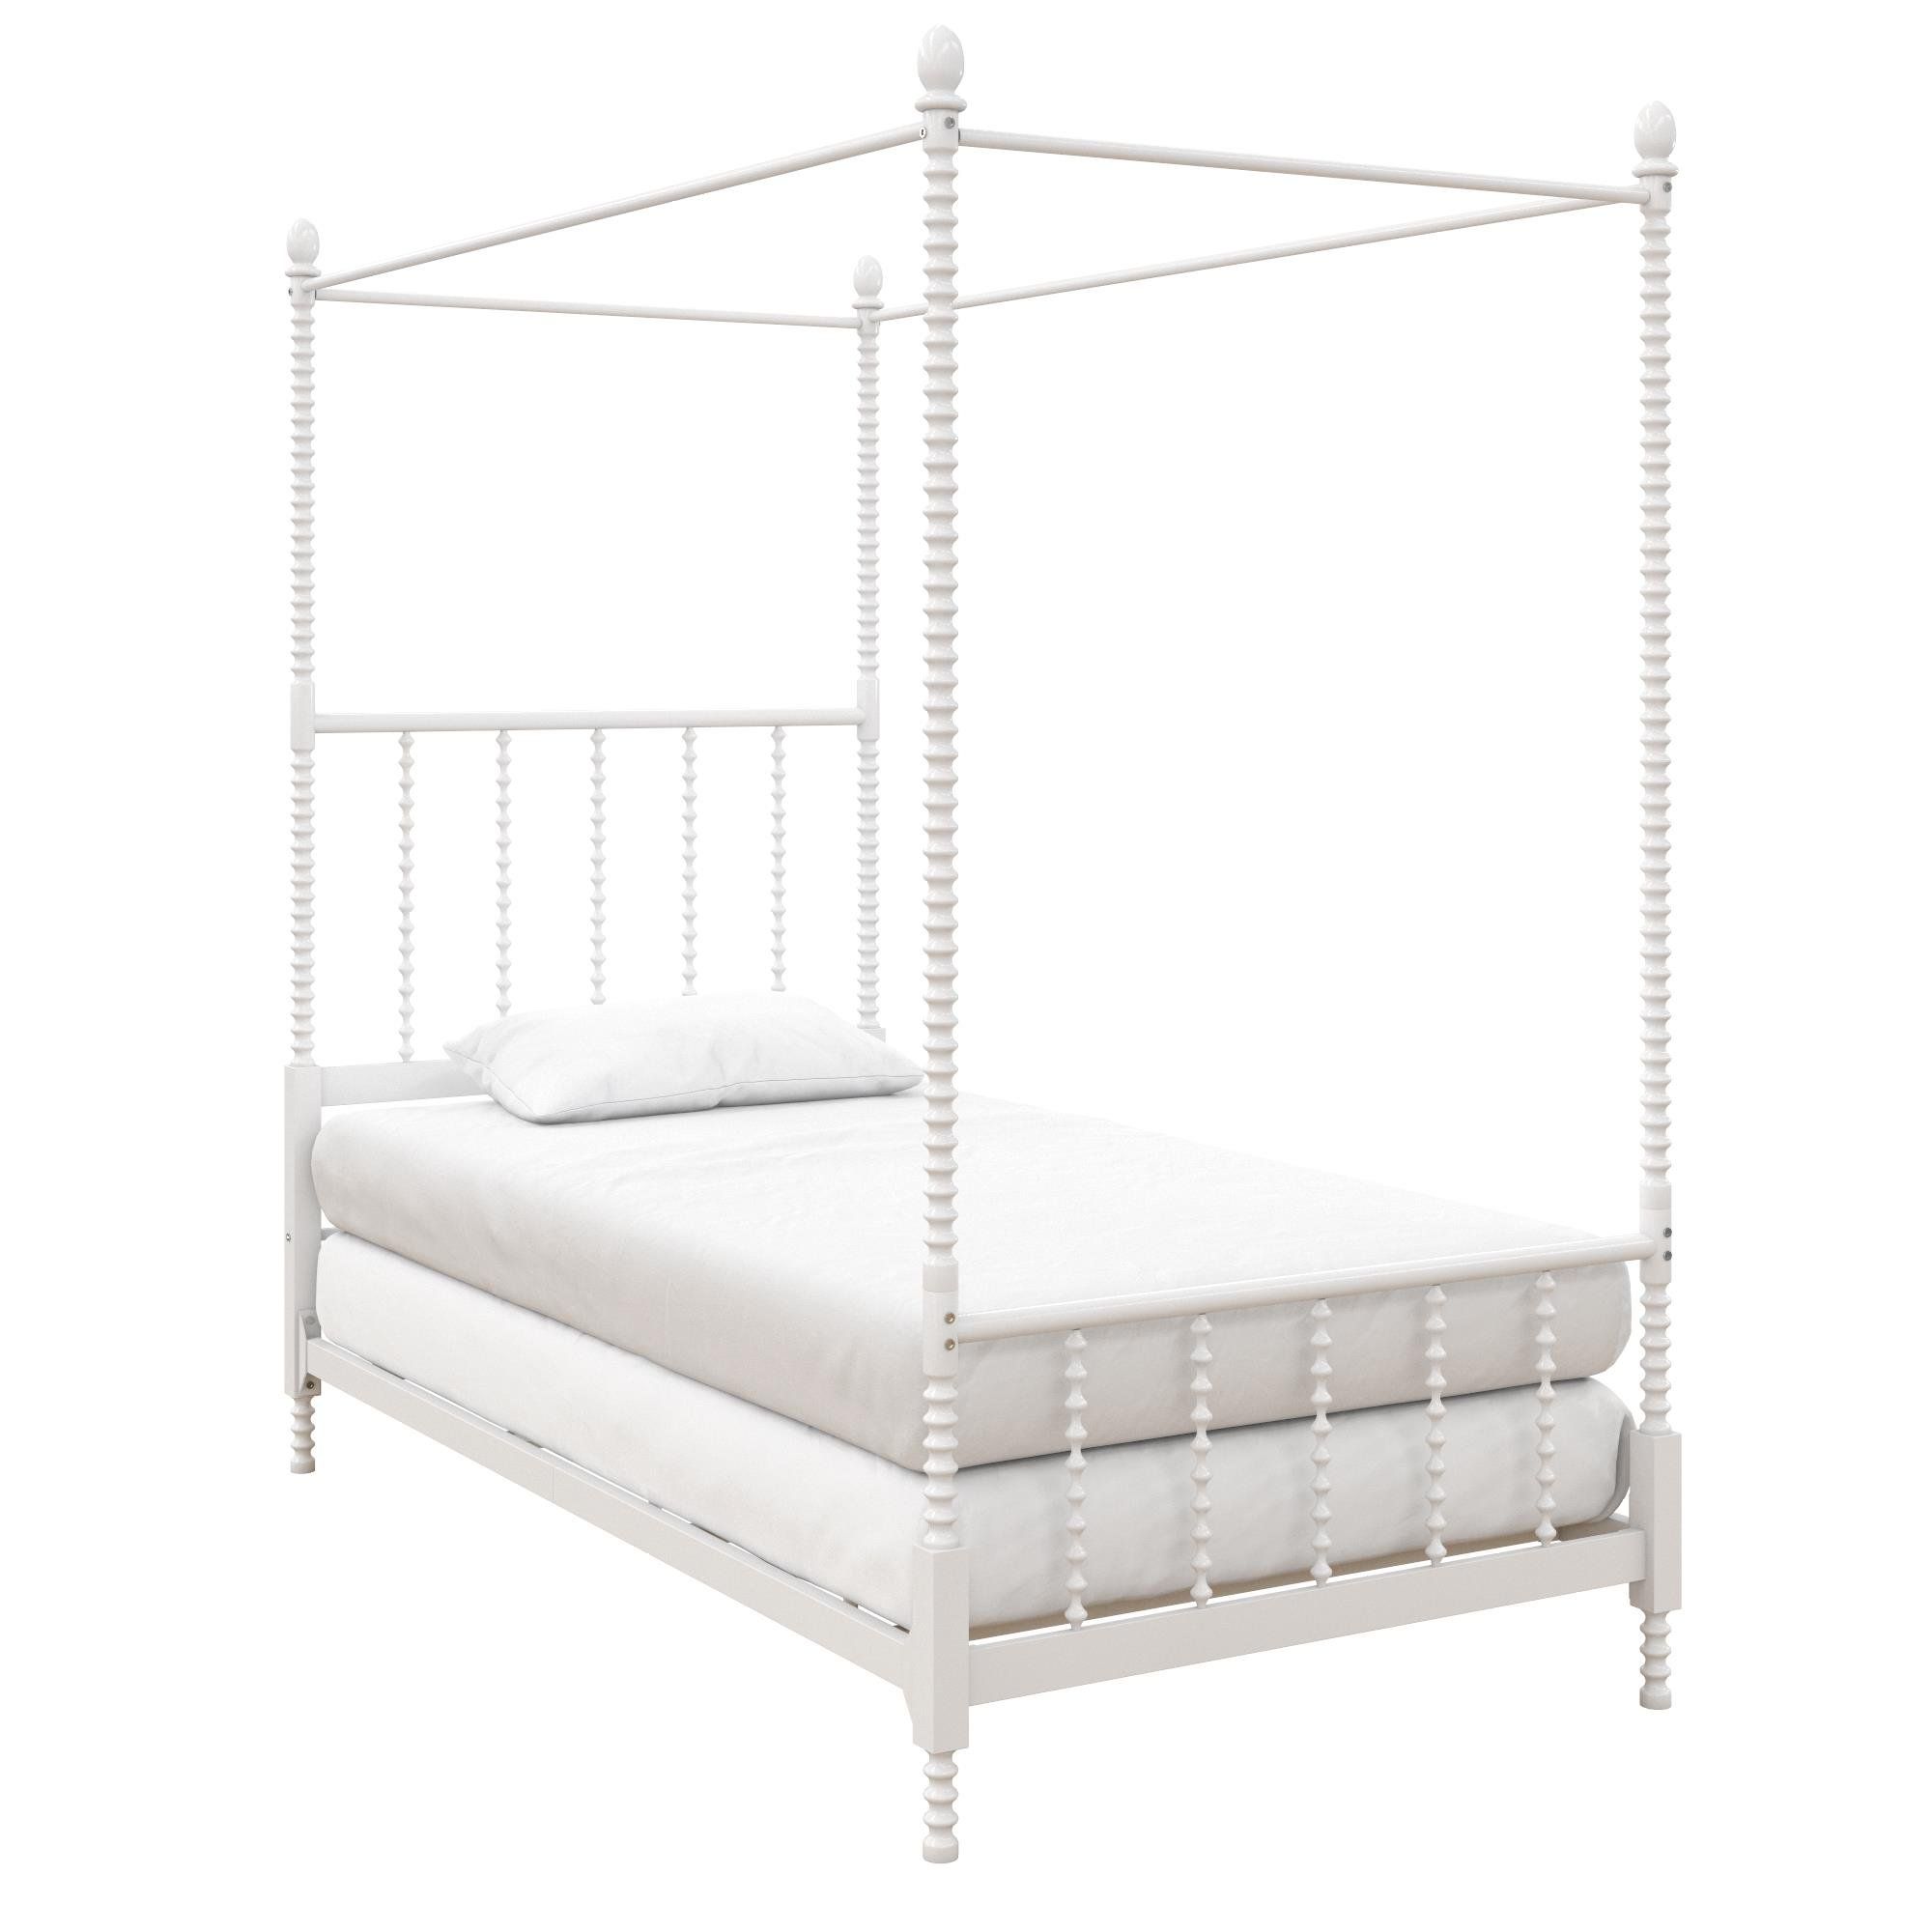 DHP Anika Metal Canopy Bed, Twin Size Frame, Bedroom Furniture, White | Walmart (US)